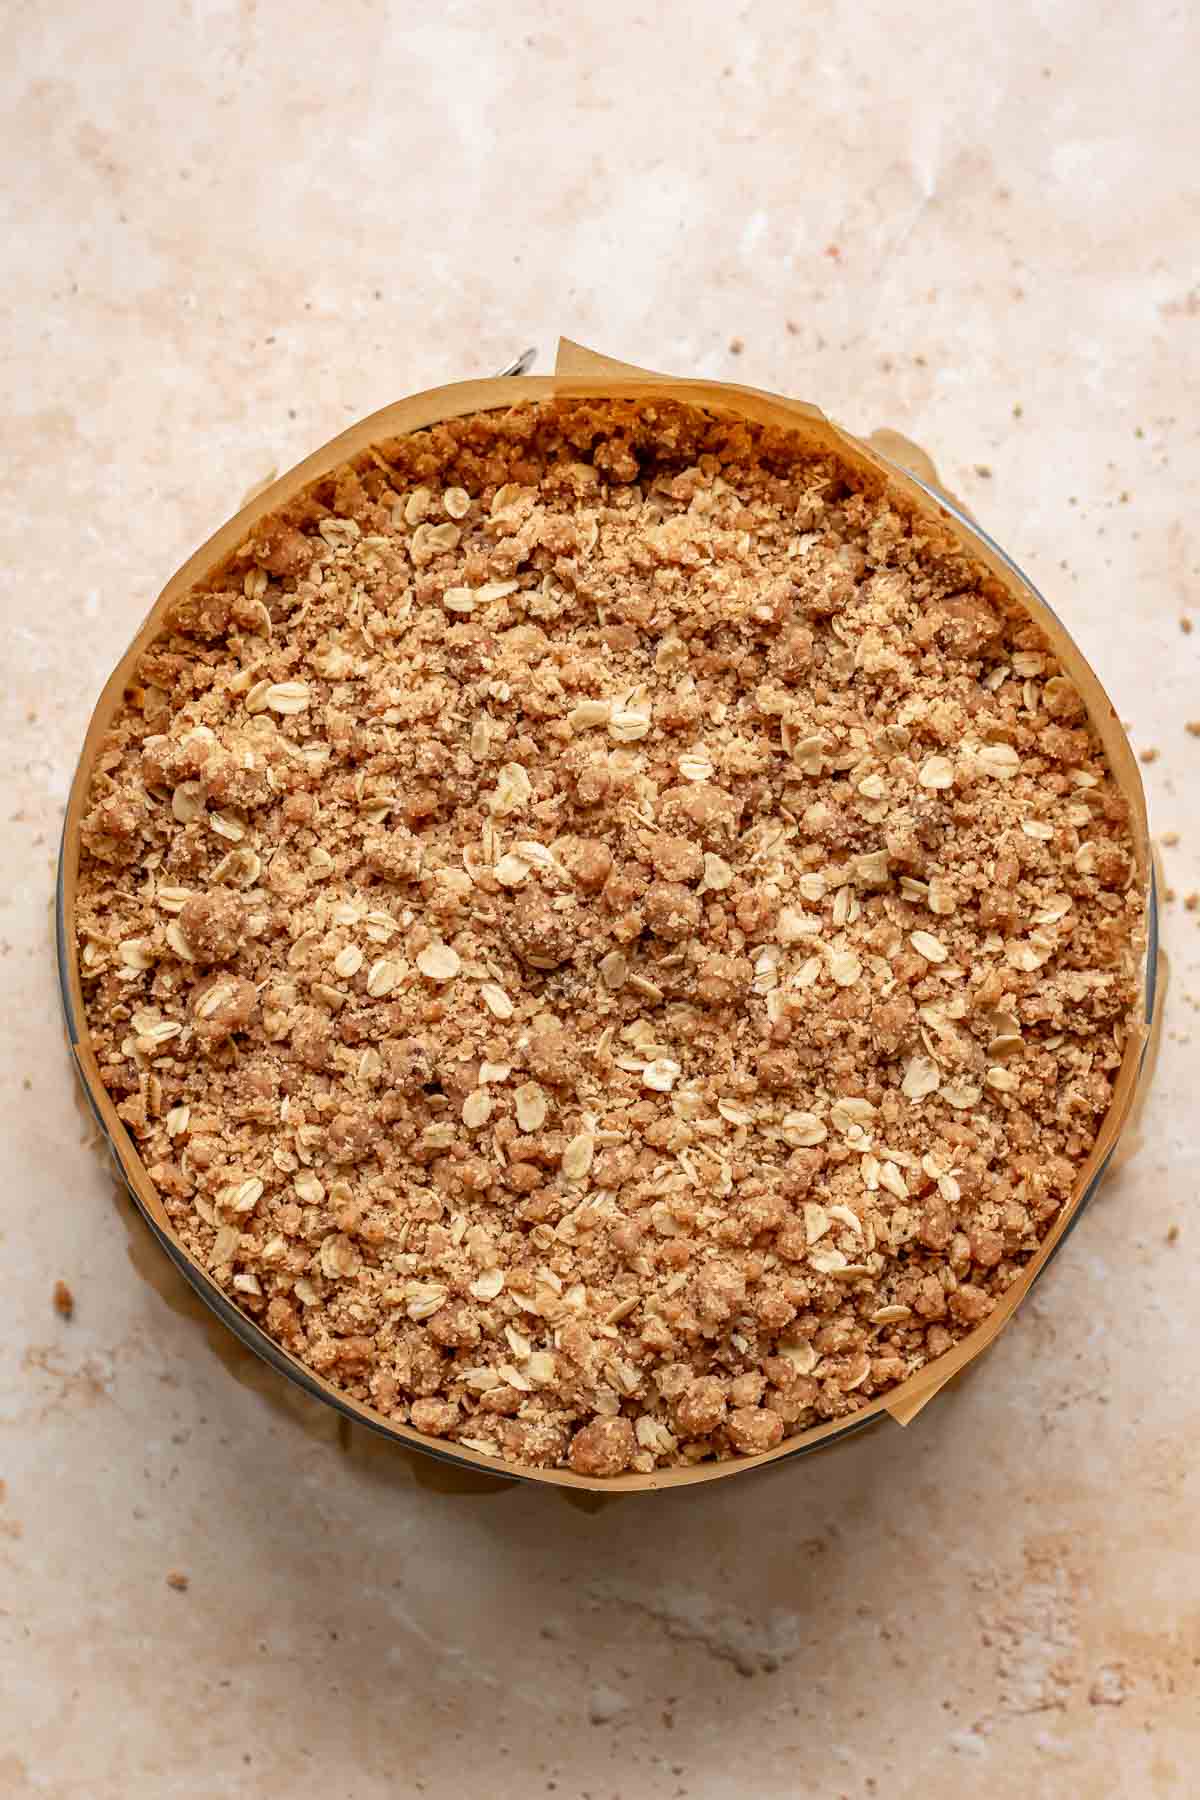 Crumble topping on top of cheesecake batter.